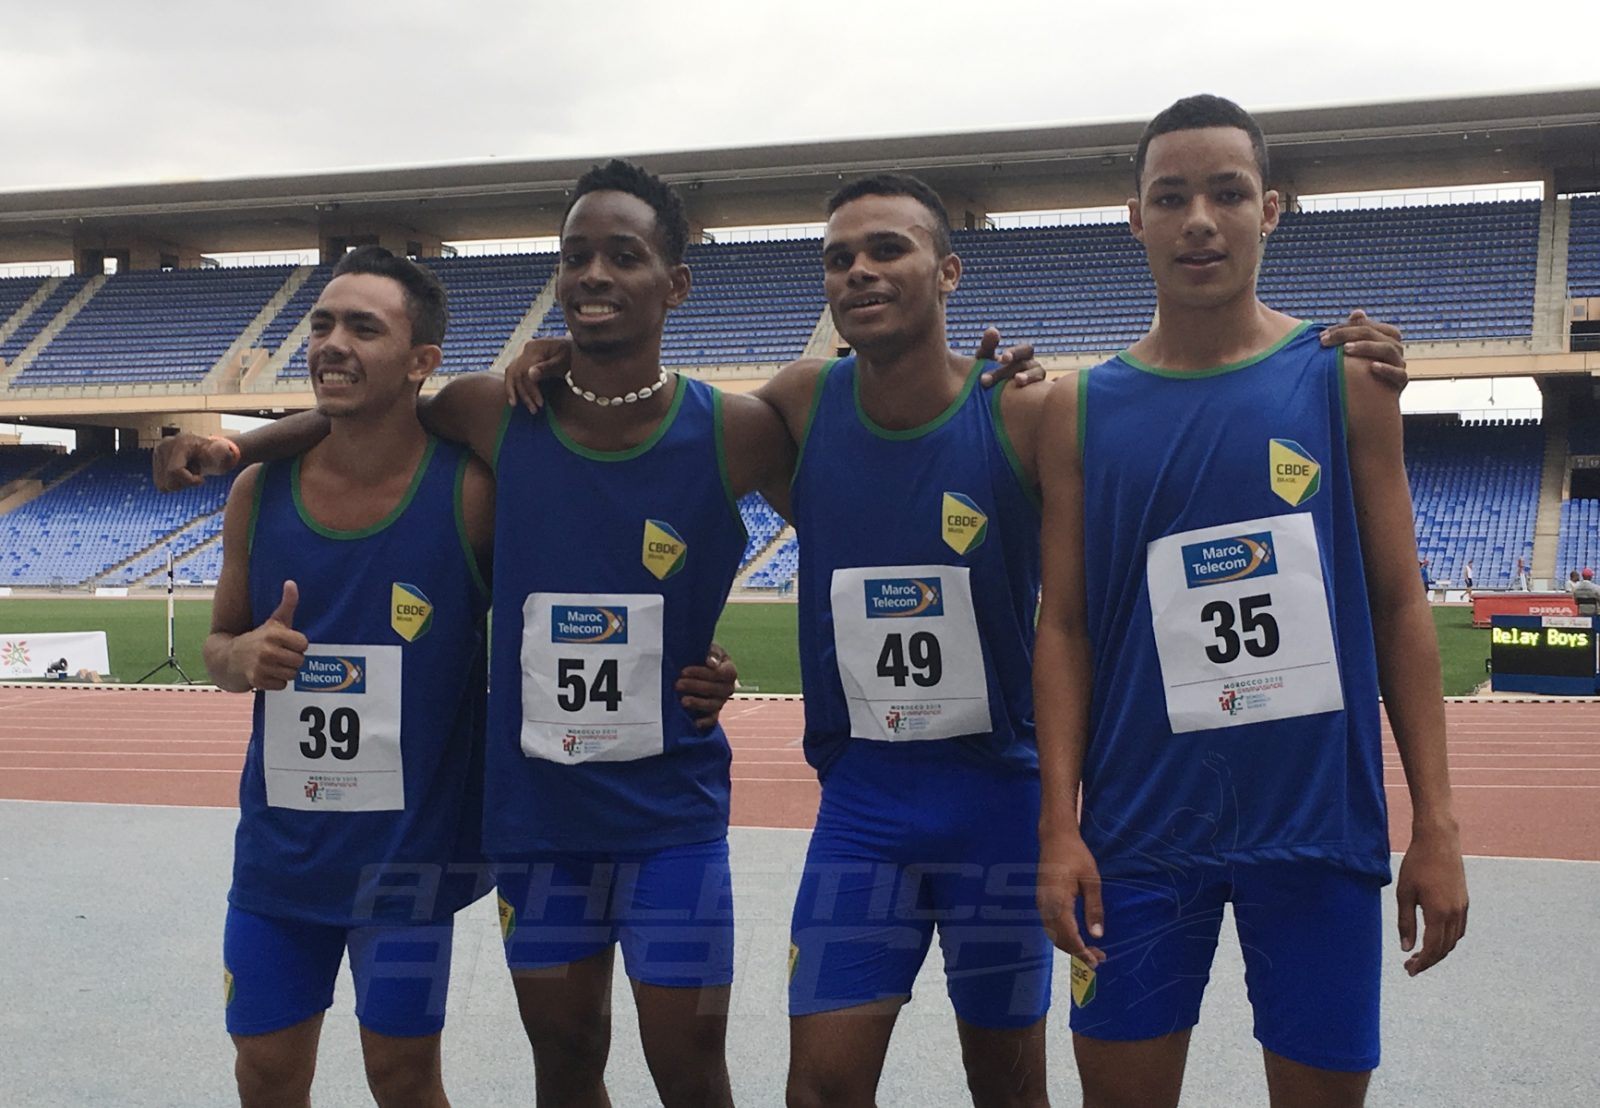 The Brazilian team after the Boys 4x400m relays medal presentation at Gymnasiade 2018 in Marrakech / Photo Credit: Yomi Omogbeja